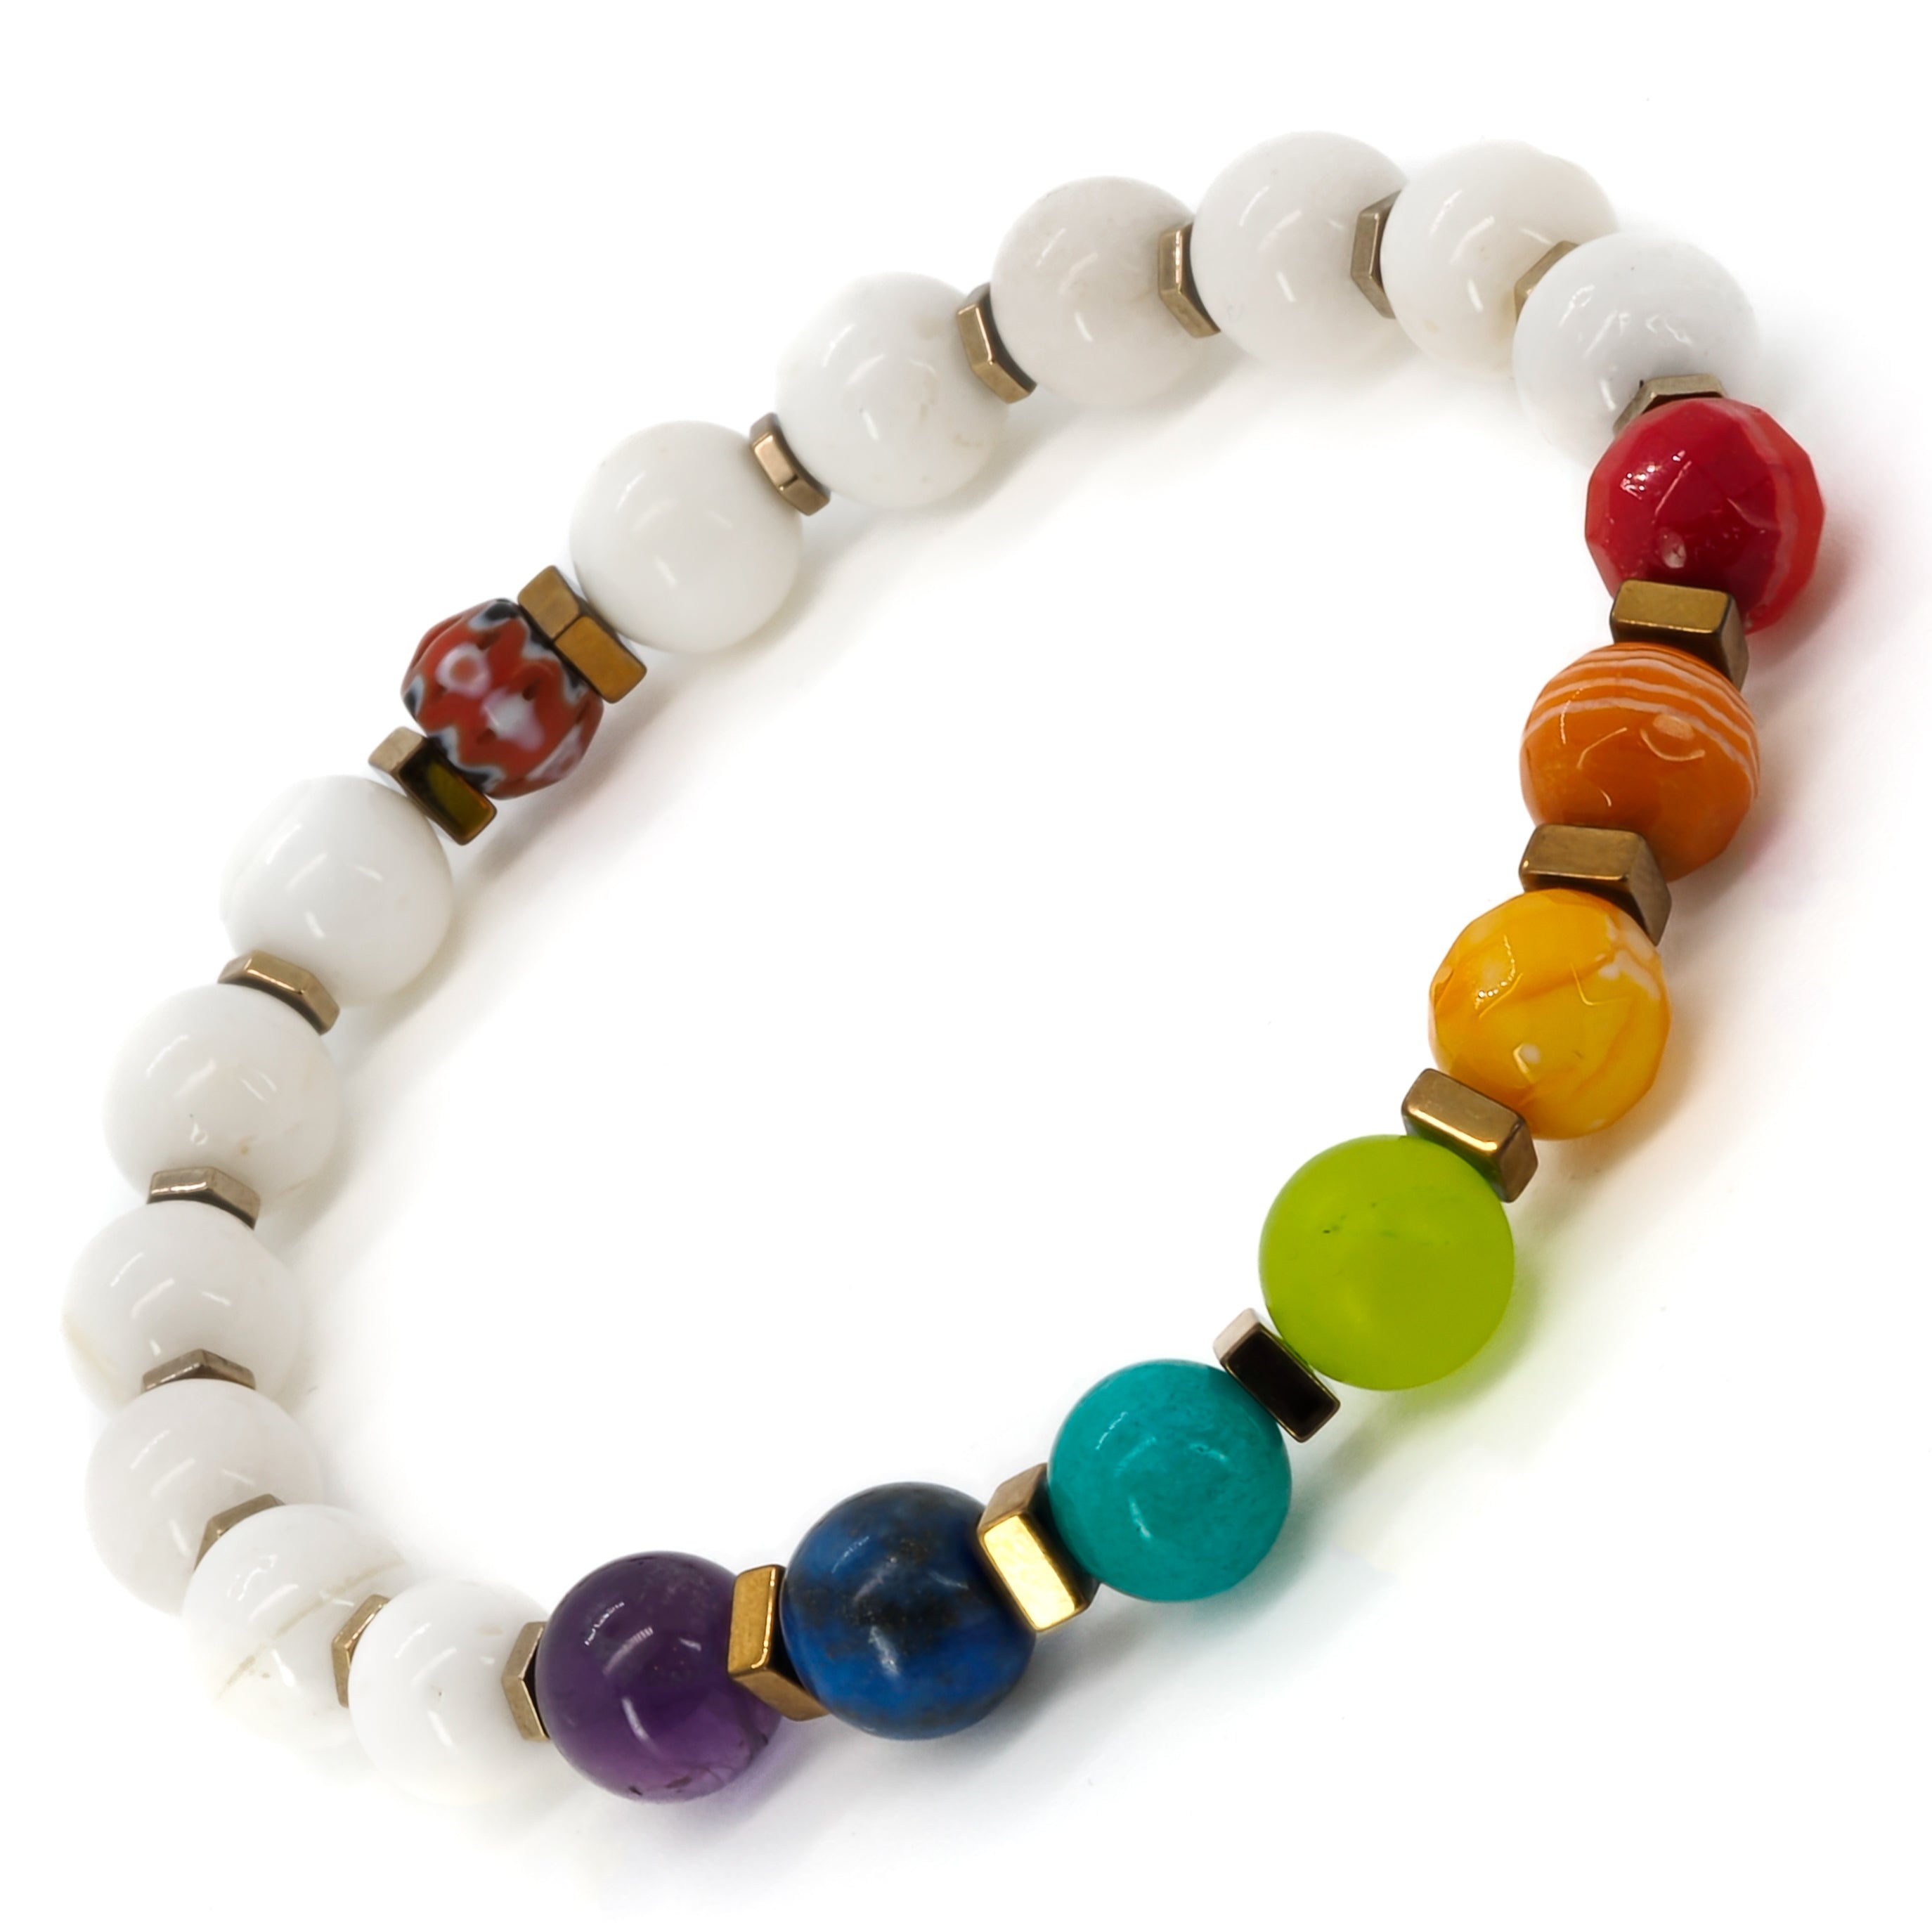 The Chakra Bracelet, a beautiful accessory for balancing your energy centers.